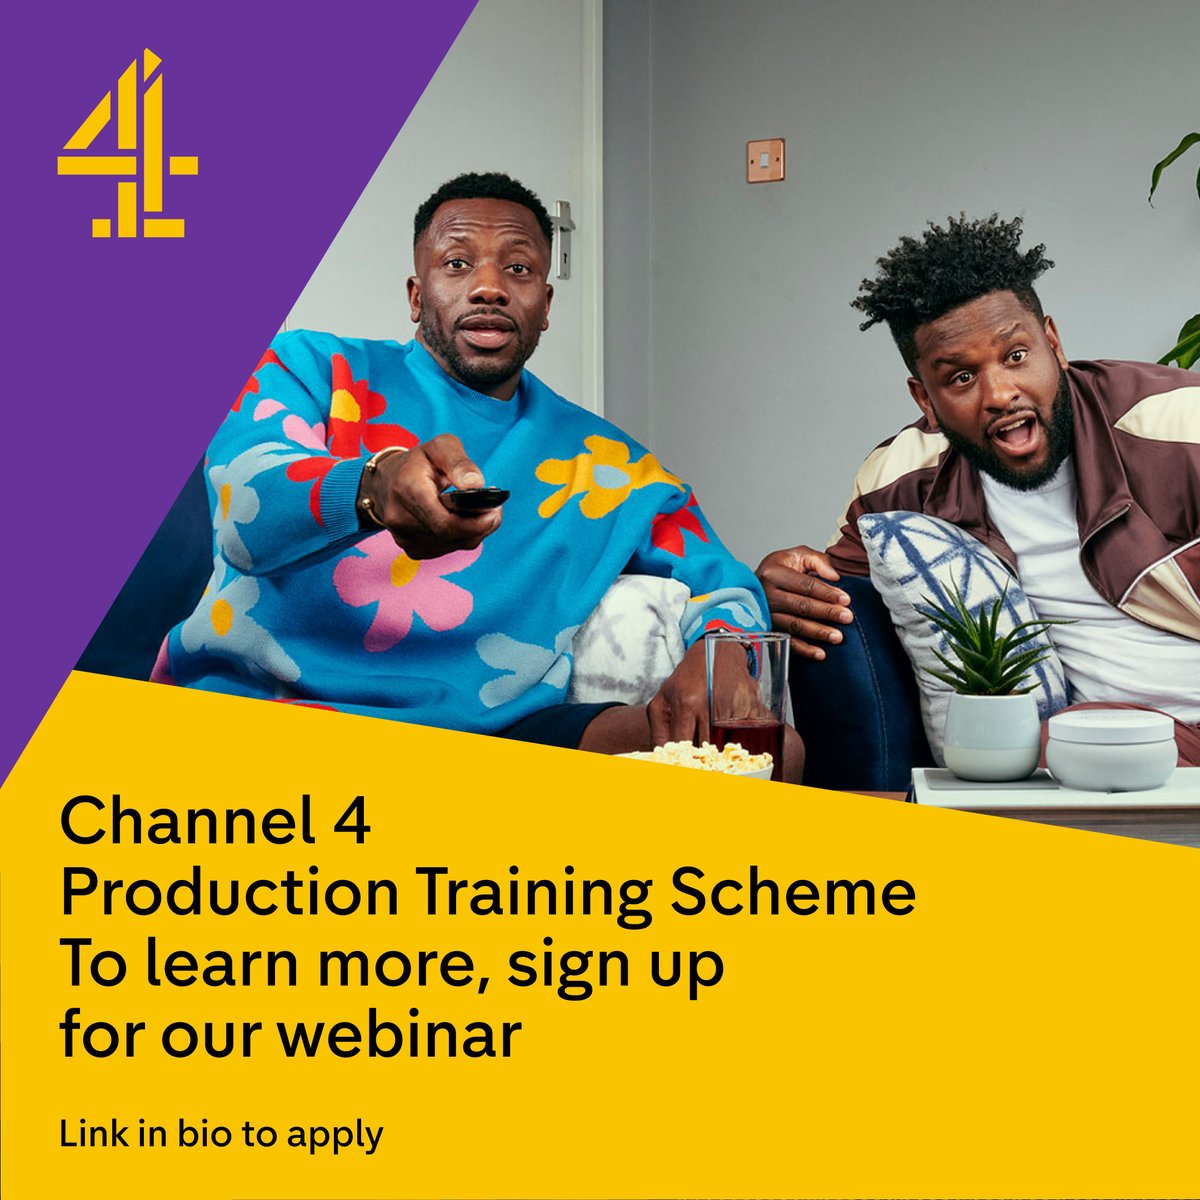 📣 In case you missed it… Applications for the Production Training Scheme are OPEN! 🤔 Thinking of applying but not sure where to start? Then sign up to the Q&A webinar we’re hosting with our partner @thinkbigger_org on Wednesday 3rd April at 1pm!